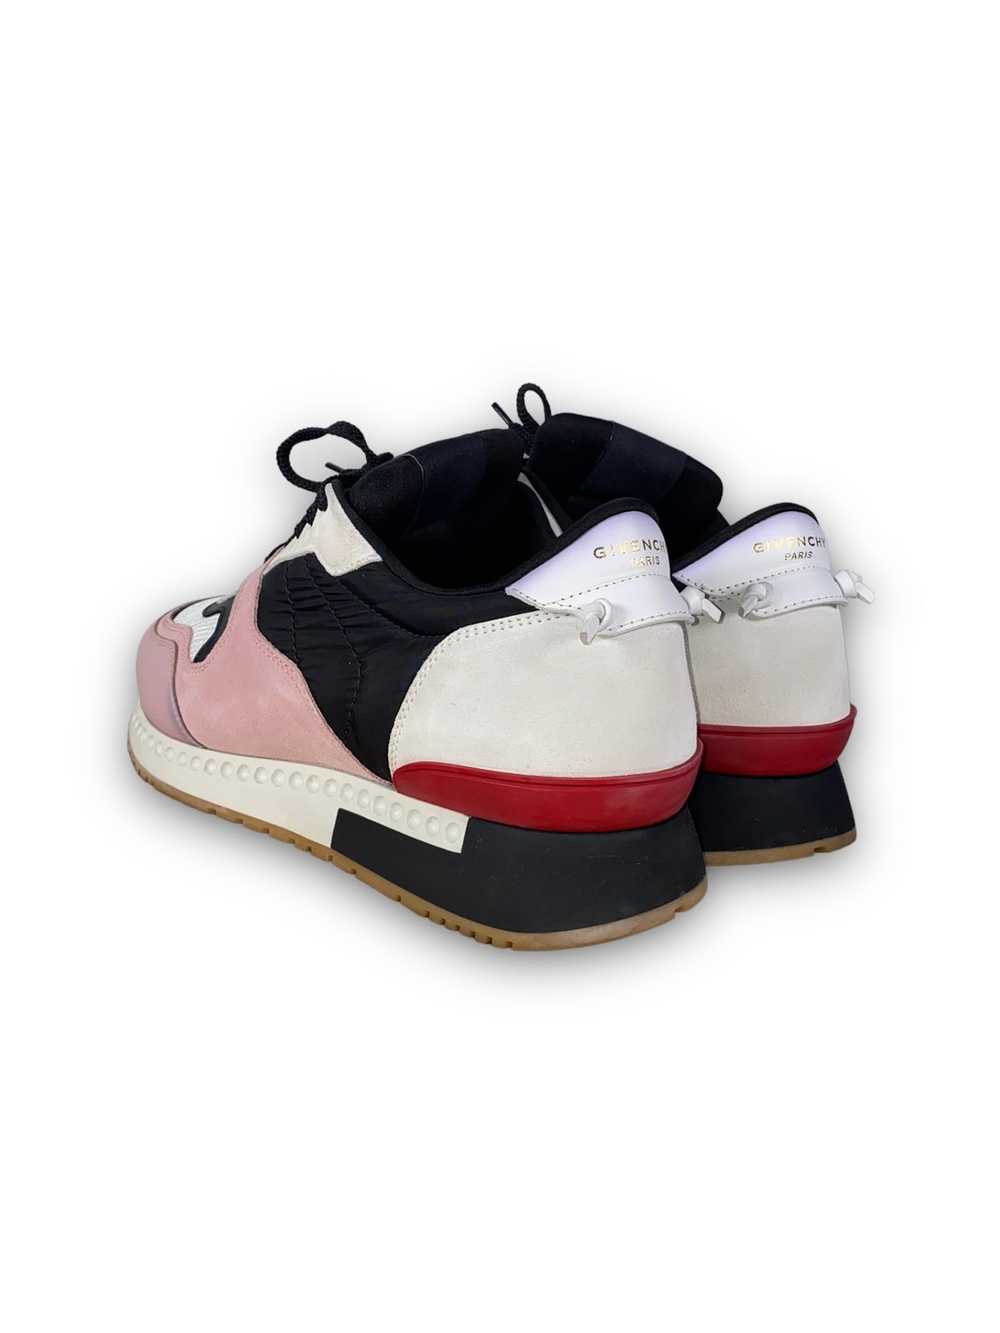 Givenchy Runner Active Trainers, size 42, Pink - image 3